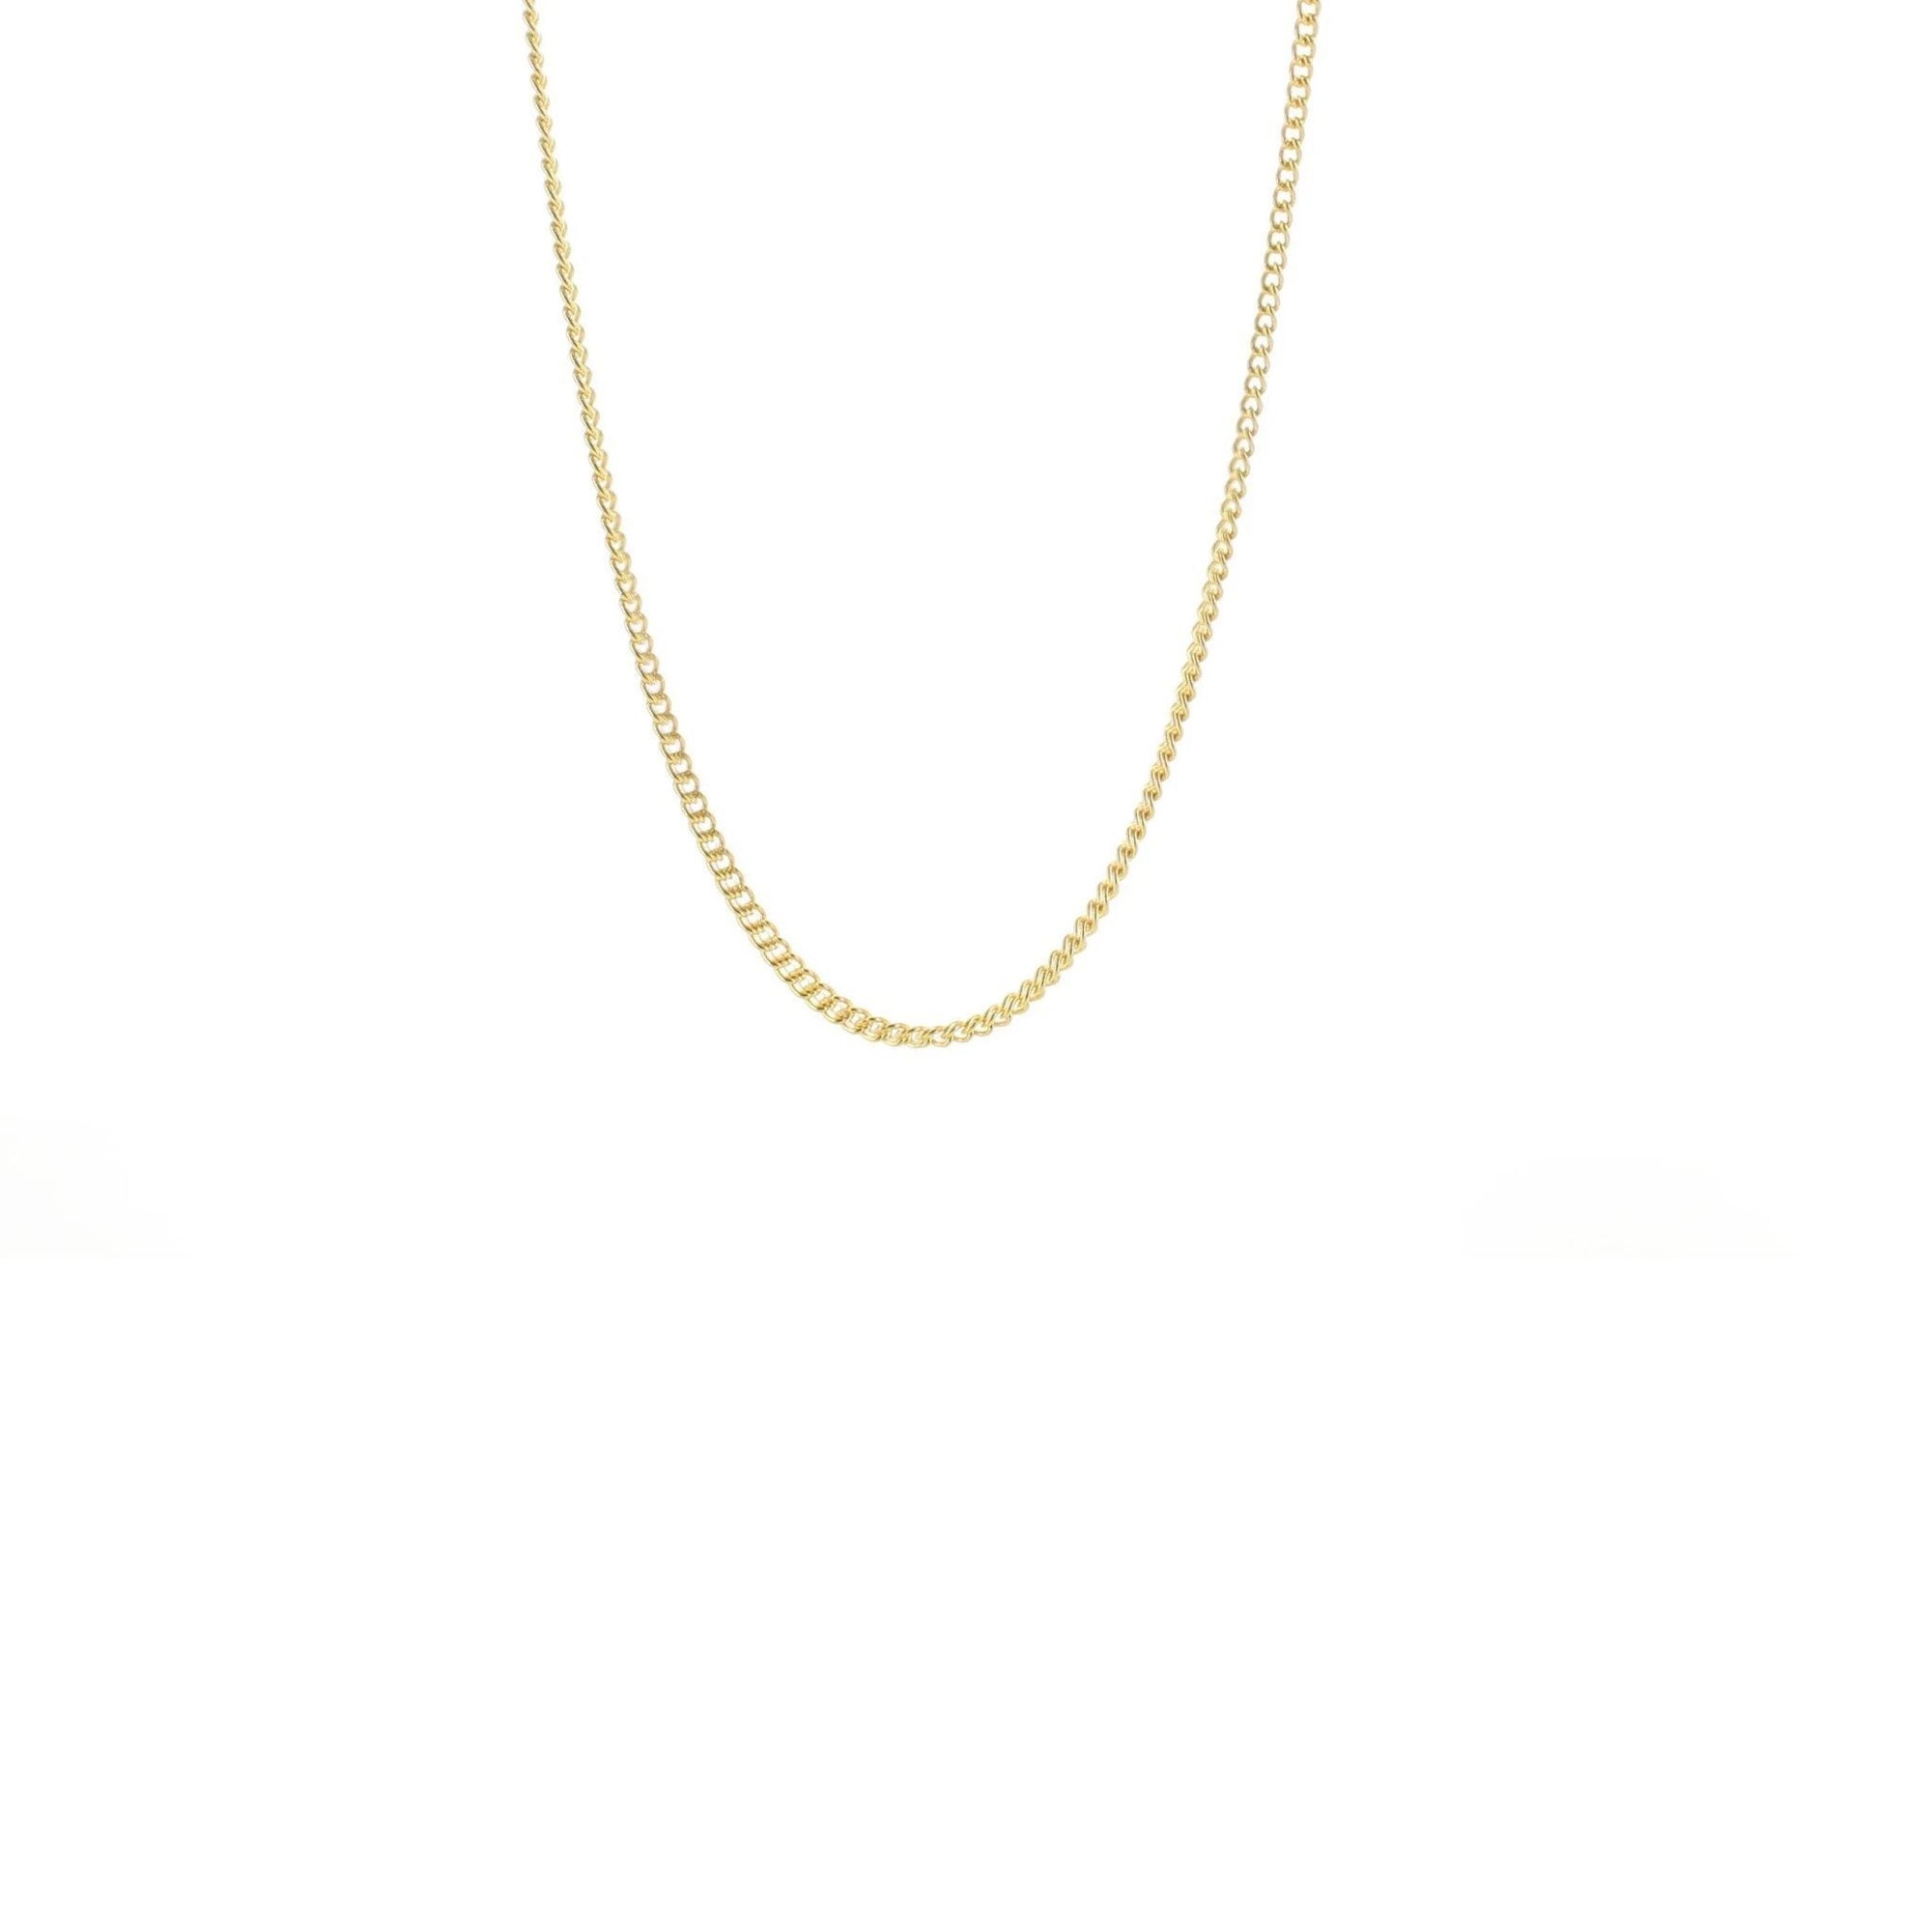 CHARMING 14-17" SHORT NECKLACE GOLD - SO PRETTY CARA COTTER